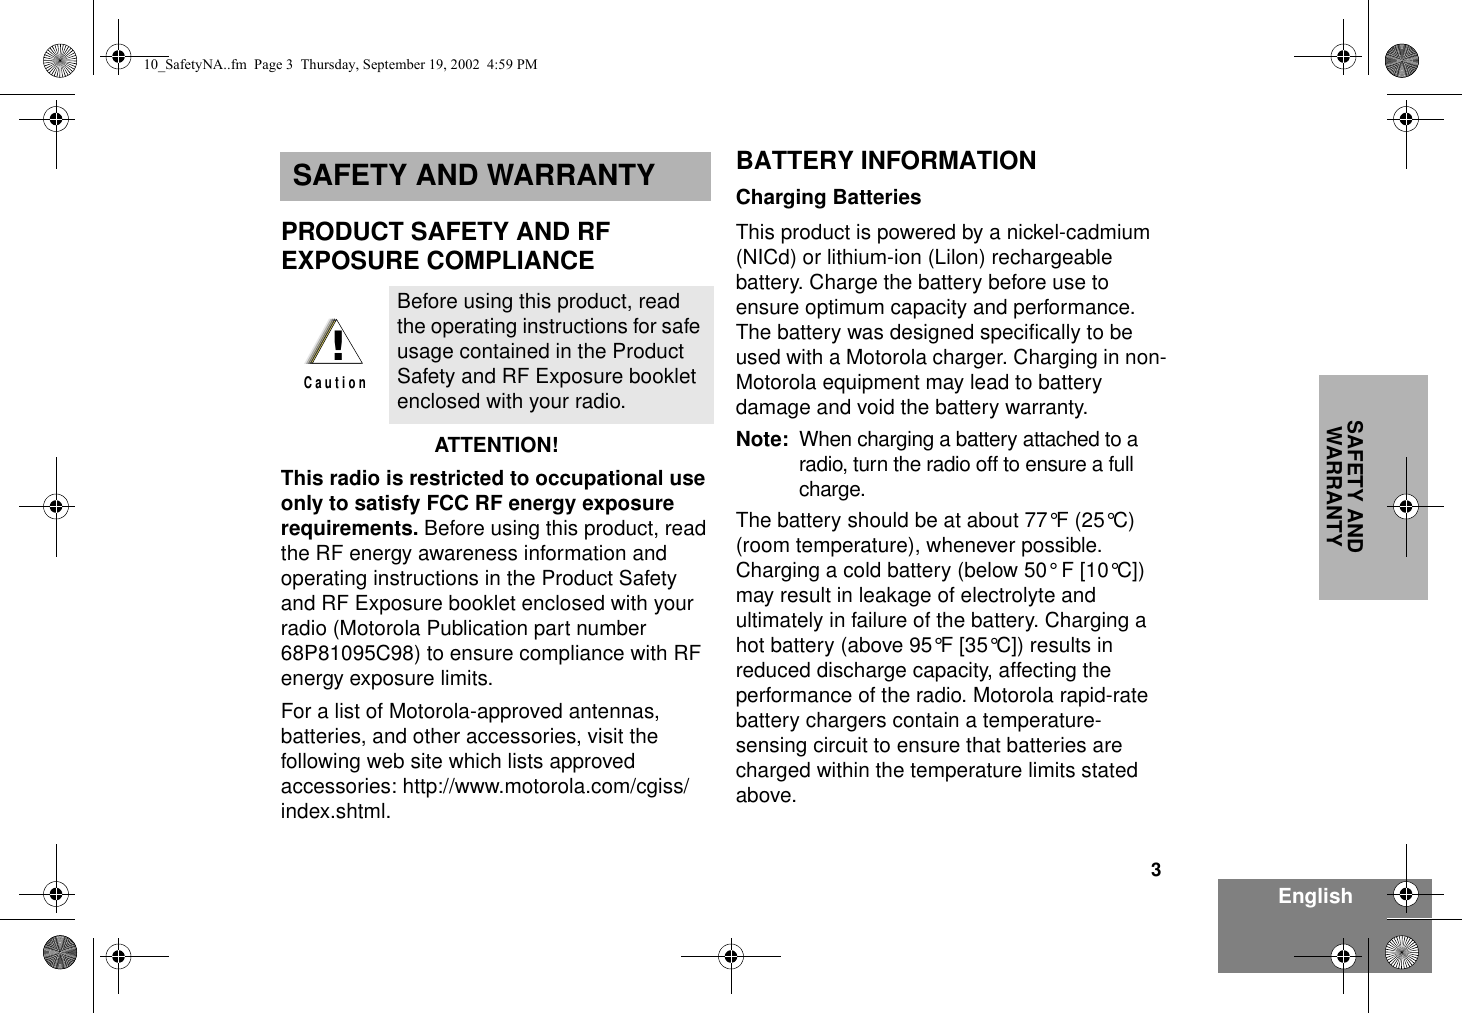 3EnglishSAFETY AND WARRANTYSAFETY AND WARRANTYPRODUCT SAFETY AND RF EXPOSURE COMPLIANCEATTENTION!  This radio is restricted to occupational use only to satisfy FCC RF energy exposure requirements. Before using this product, read the RF energy awareness information and operating instructions in the Product Safety and RF Exposure booklet enclosed with your radio (Motorola Publication part number 68P81095C98) to ensure compliance with RF energy exposure limits.  For a list of Motorola-approved antennas, batteries, and other accessories, visit the following web site which lists approved accessories: http://www.motorola.com/cgiss/index.shtml.BATTERY INFORMATIONCharging BatteriesThis product is powered by a nickel-cadmium (NICd) or lithium-ion (Lilon) rechargeable battery. Charge the battery before use to ensure optimum capacity and performance. The battery was designed specifically to be used with a Motorola charger. Charging in non-Motorola equipment may lead to battery damage and void the battery warranty.Note: When charging a battery attached to a radio, turn the radio off to ensure a full charge.The battery should be at about 77°F (25°C) (room temperature), whenever possible. Charging a cold battery (below 50° F [10°C]) may result in leakage of electrolyte and ultimately in failure of the battery. Charging a hot battery (above 95°F [35°C]) results in reduced discharge capacity, affecting the performance of the radio. Motorola rapid-rate battery chargers contain a temperature-sensing circuit to ensure that batteries are charged within the temperature limits stated above.Before using this product, read the operating instructions for safe usage contained in the Product Safety and RF Exposure booklet enclosed with your radio.!C a u t i o n10_SafetyNA..fm  Page 3  Thursday, September 19, 2002  4:59 PM